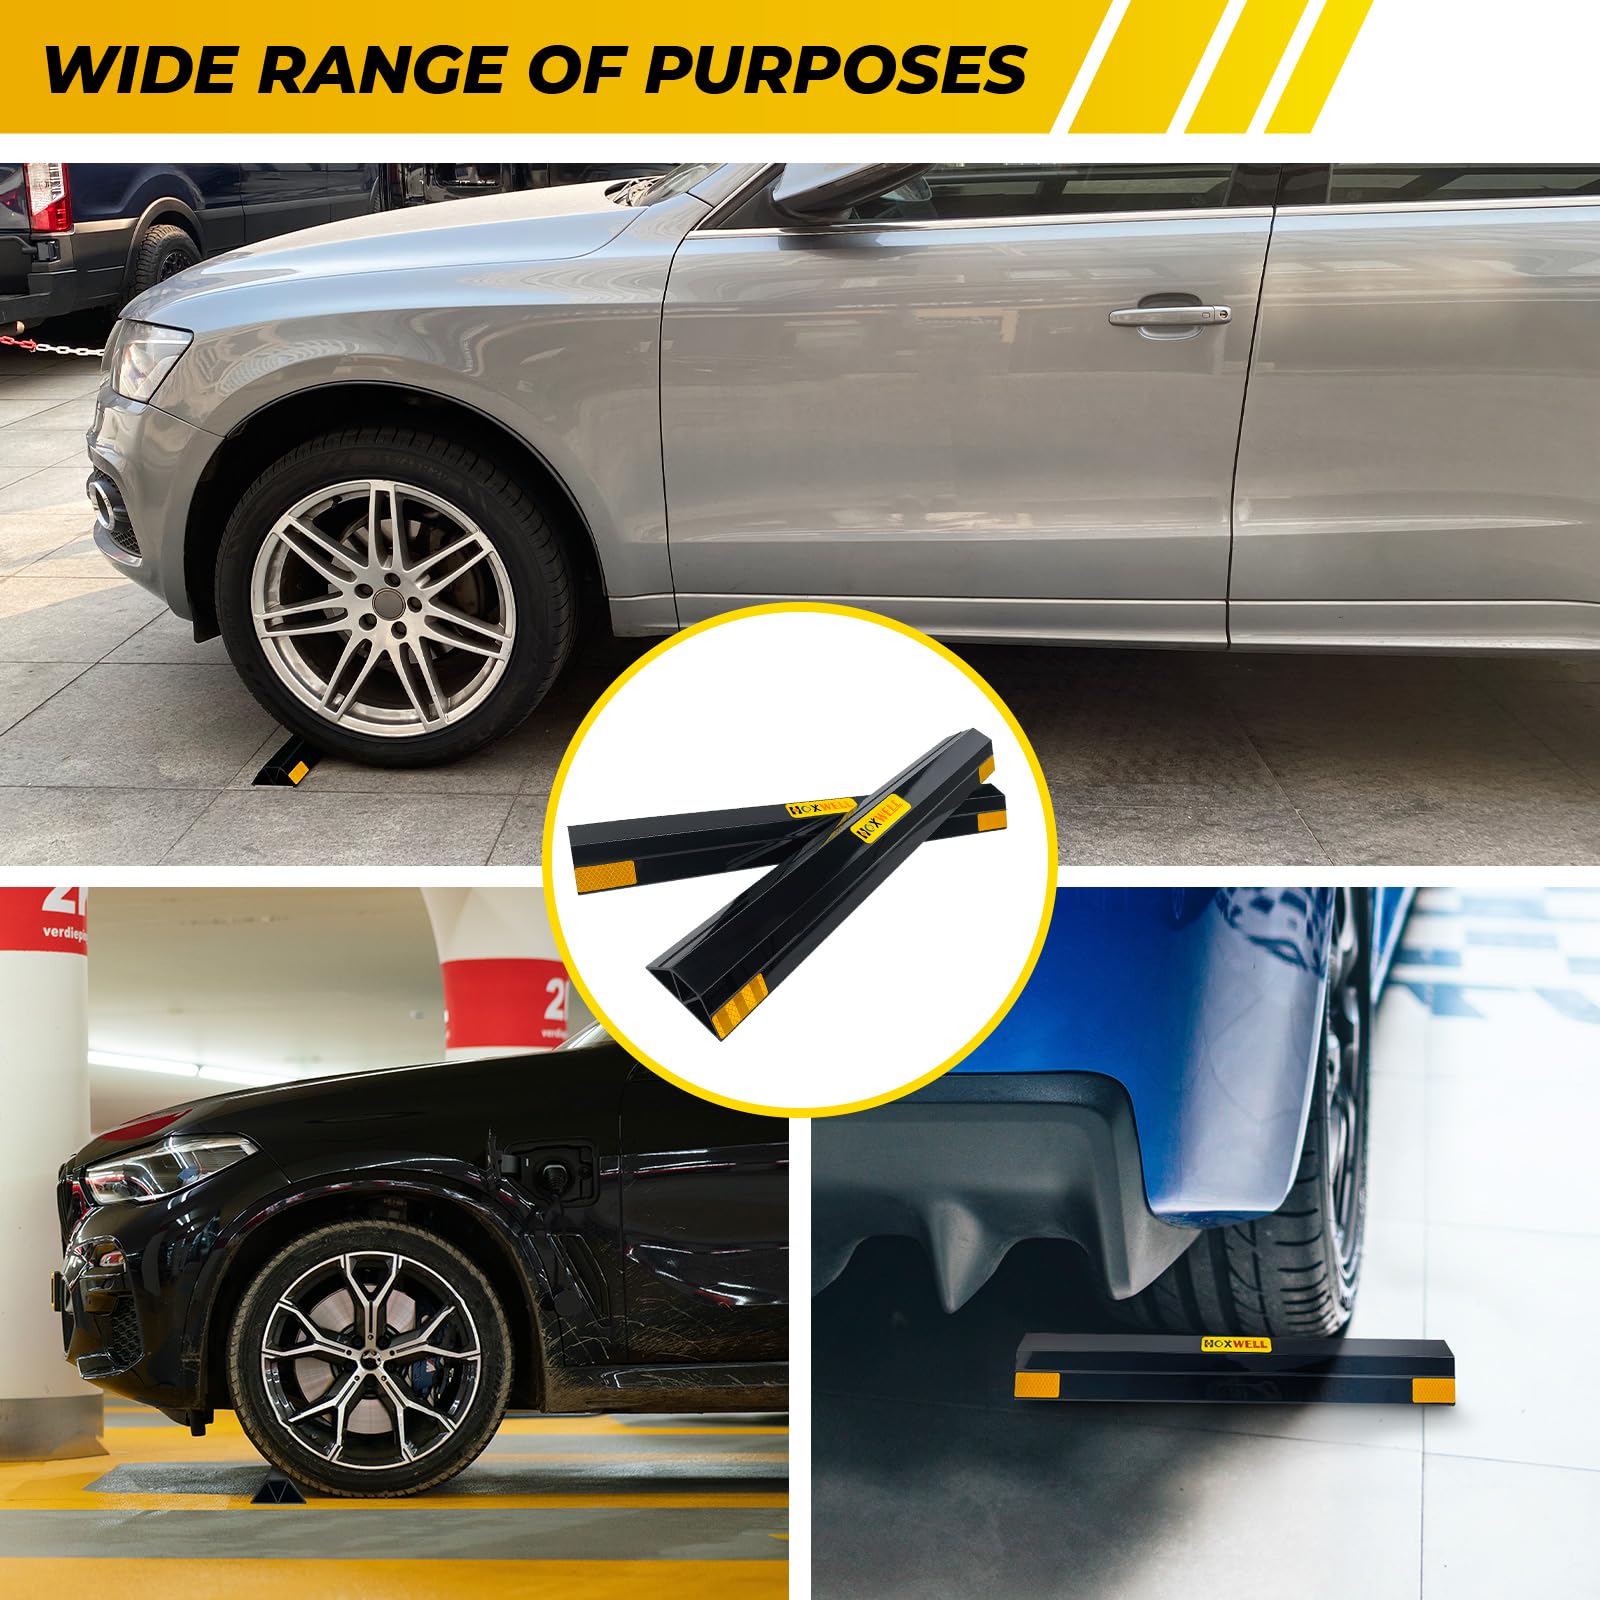 24 Inch (New Upgrade) 2 PCS Heavy Duty Car Parking Stopper for Garage, Parking Aid Protects Car, Parking Gadgets Easy to Install 2 Packs, 24" L x 3.7" W x 1.8" H